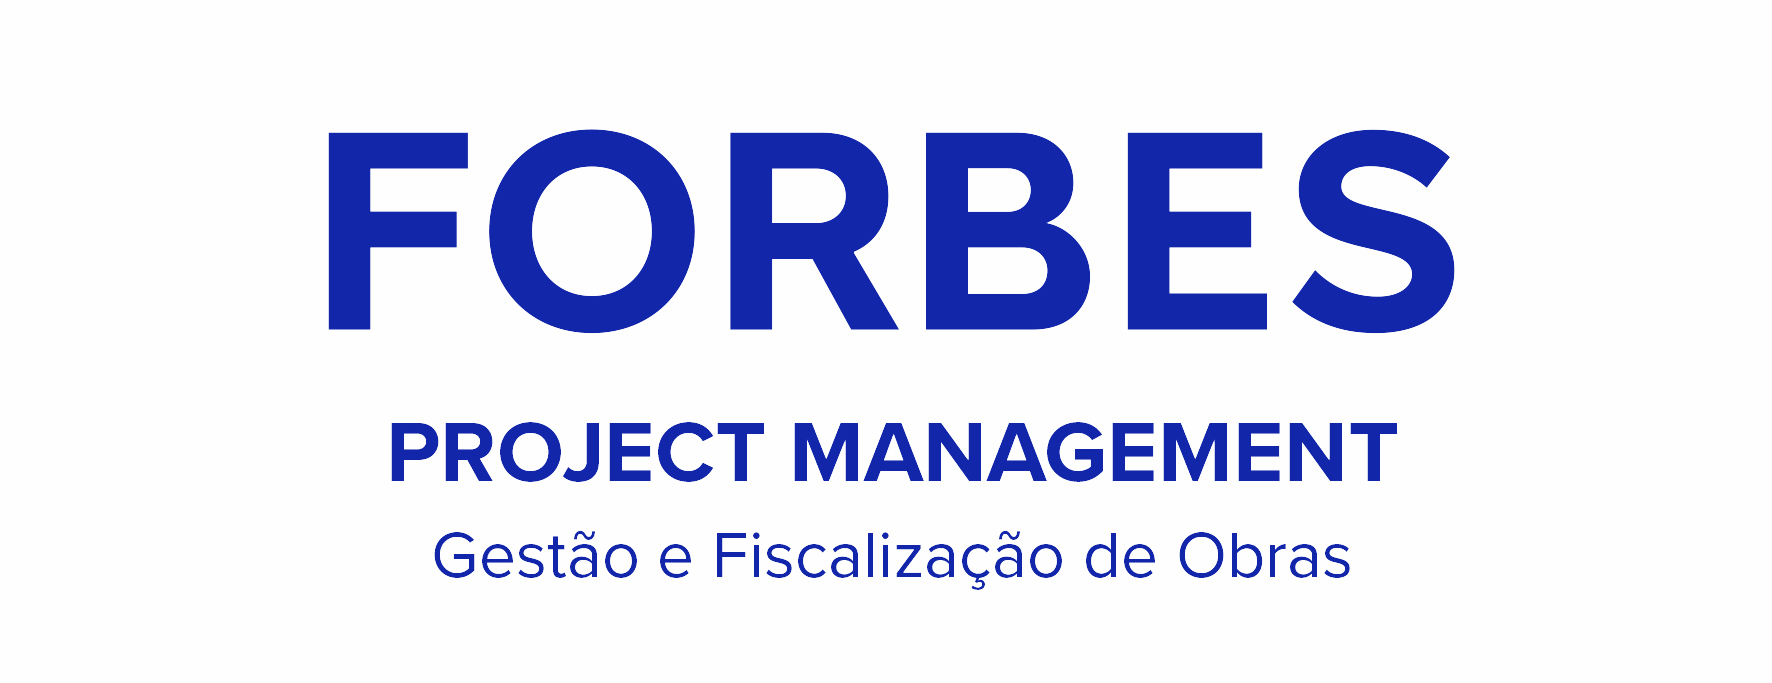 Forbes Project Management